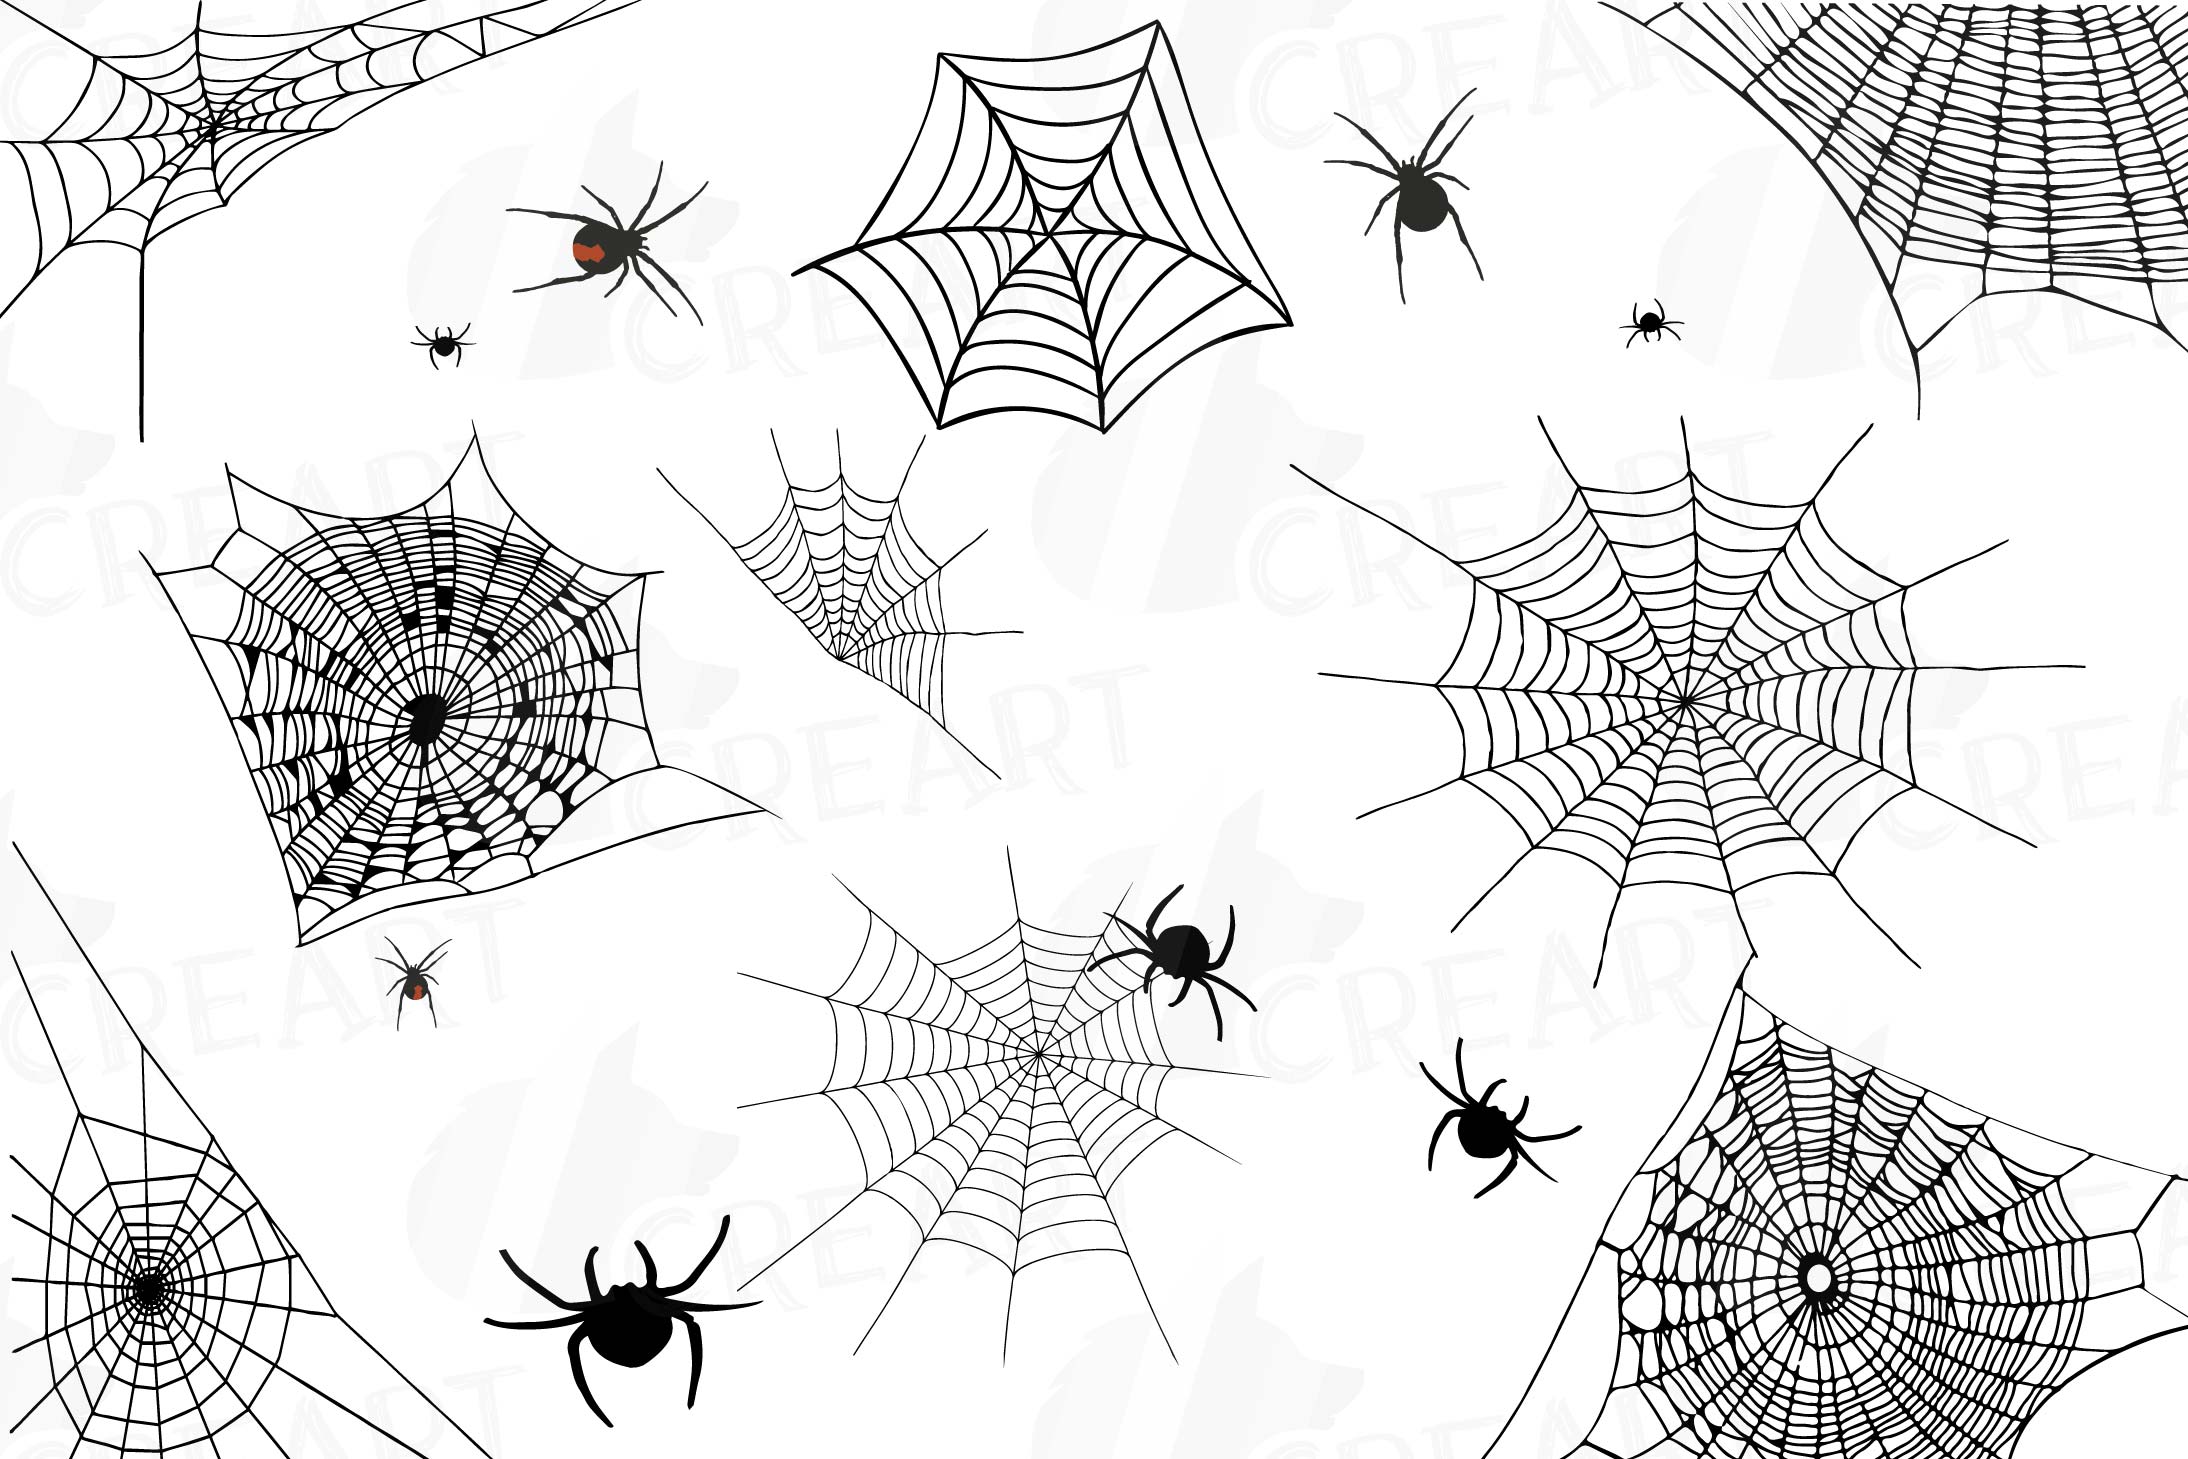 Spiders and Spider webs silhouettes clip art pack, Halloween